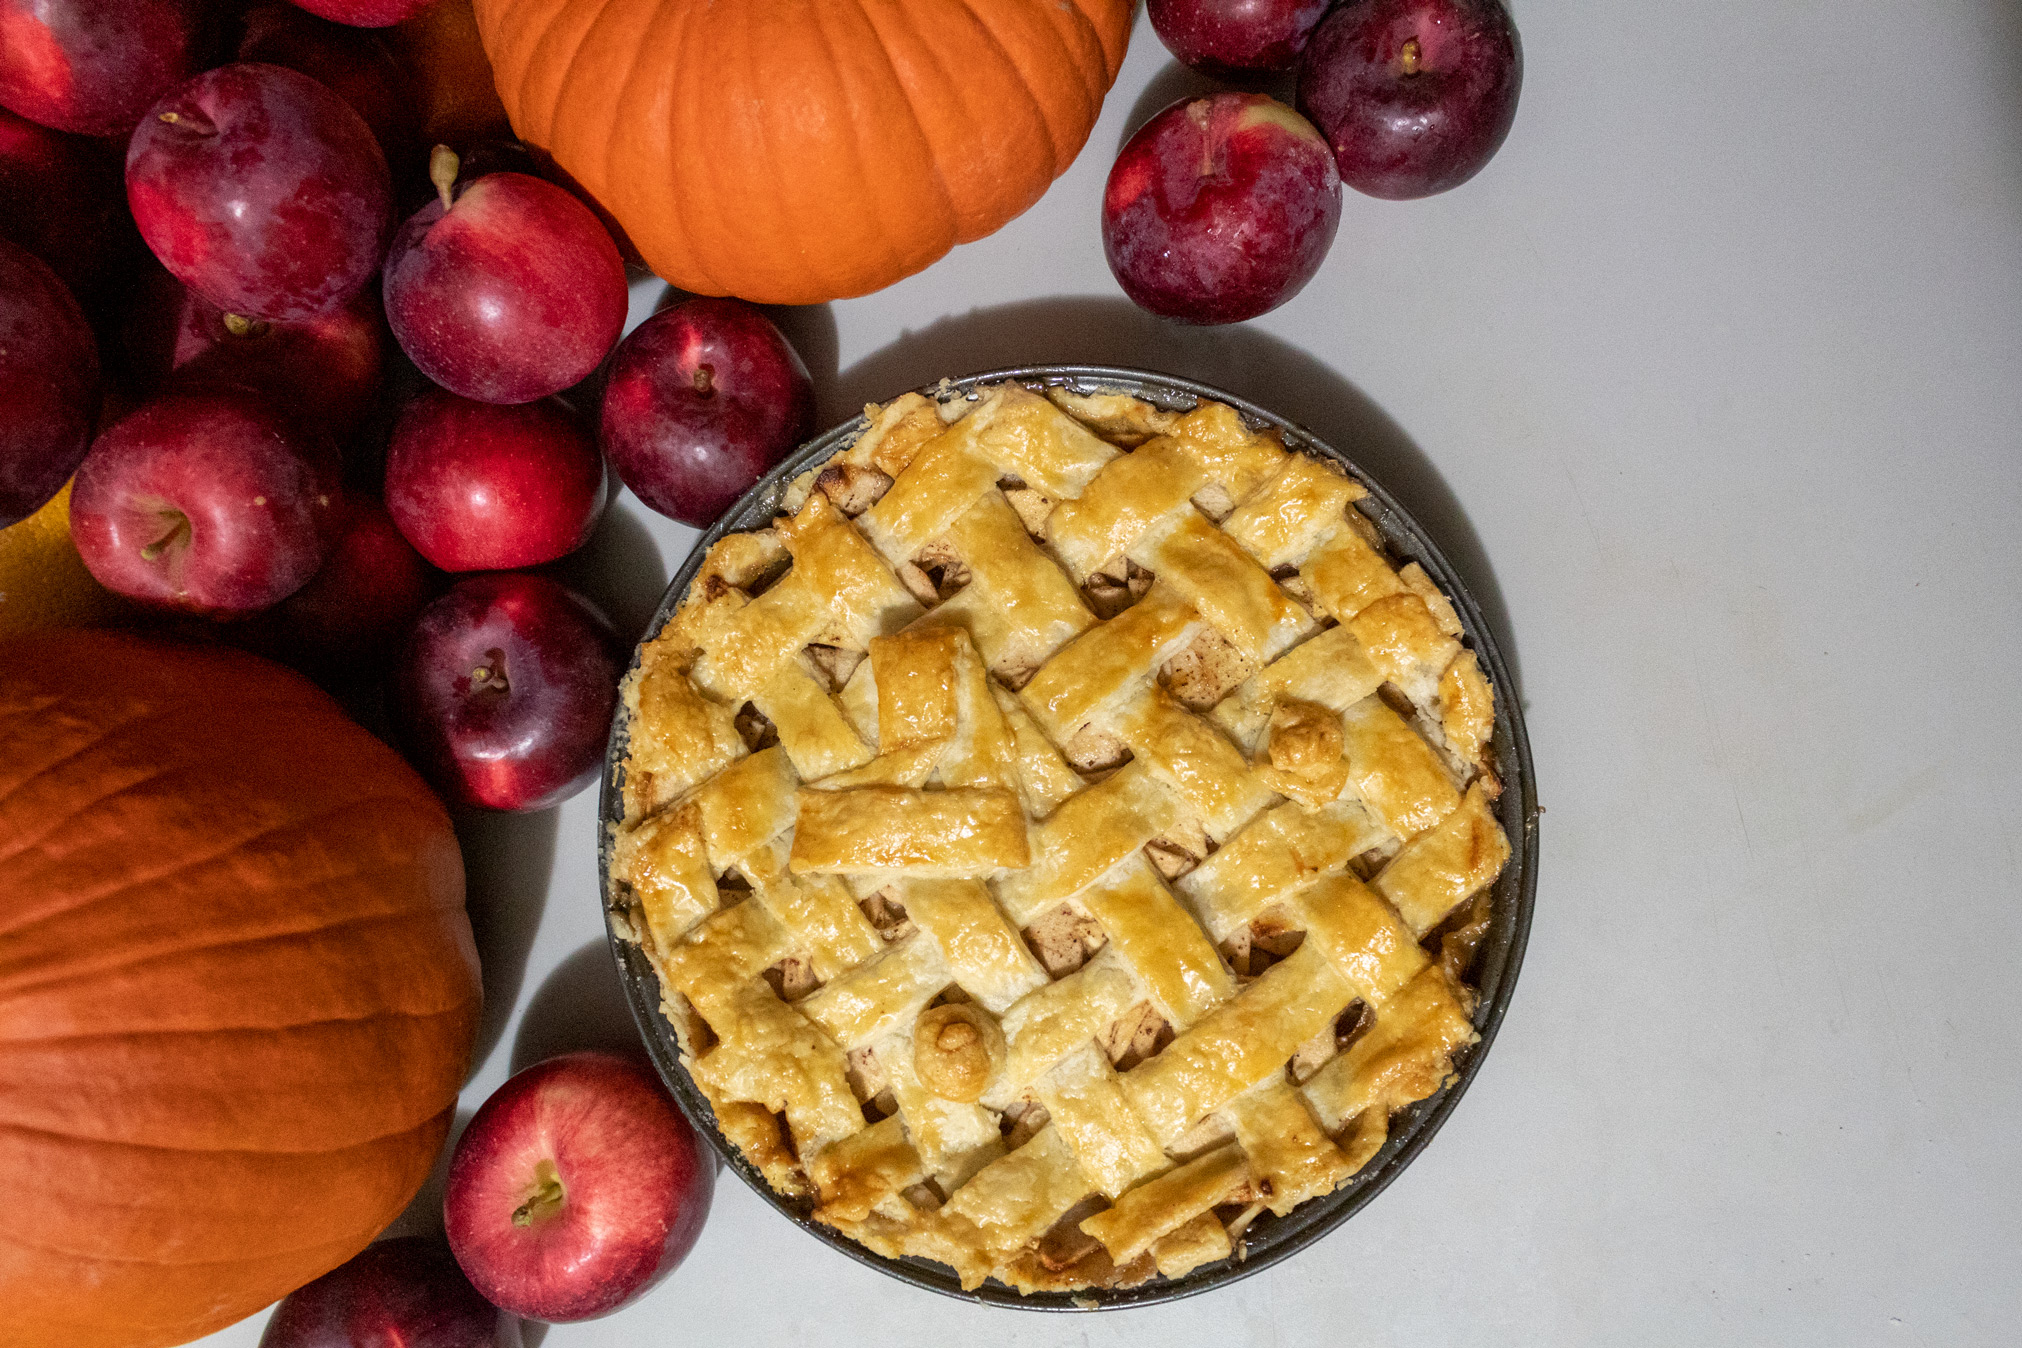 Apple pie with latticed top crust viewed from above surrounded by Spartan apples and pumpkins on the top and left